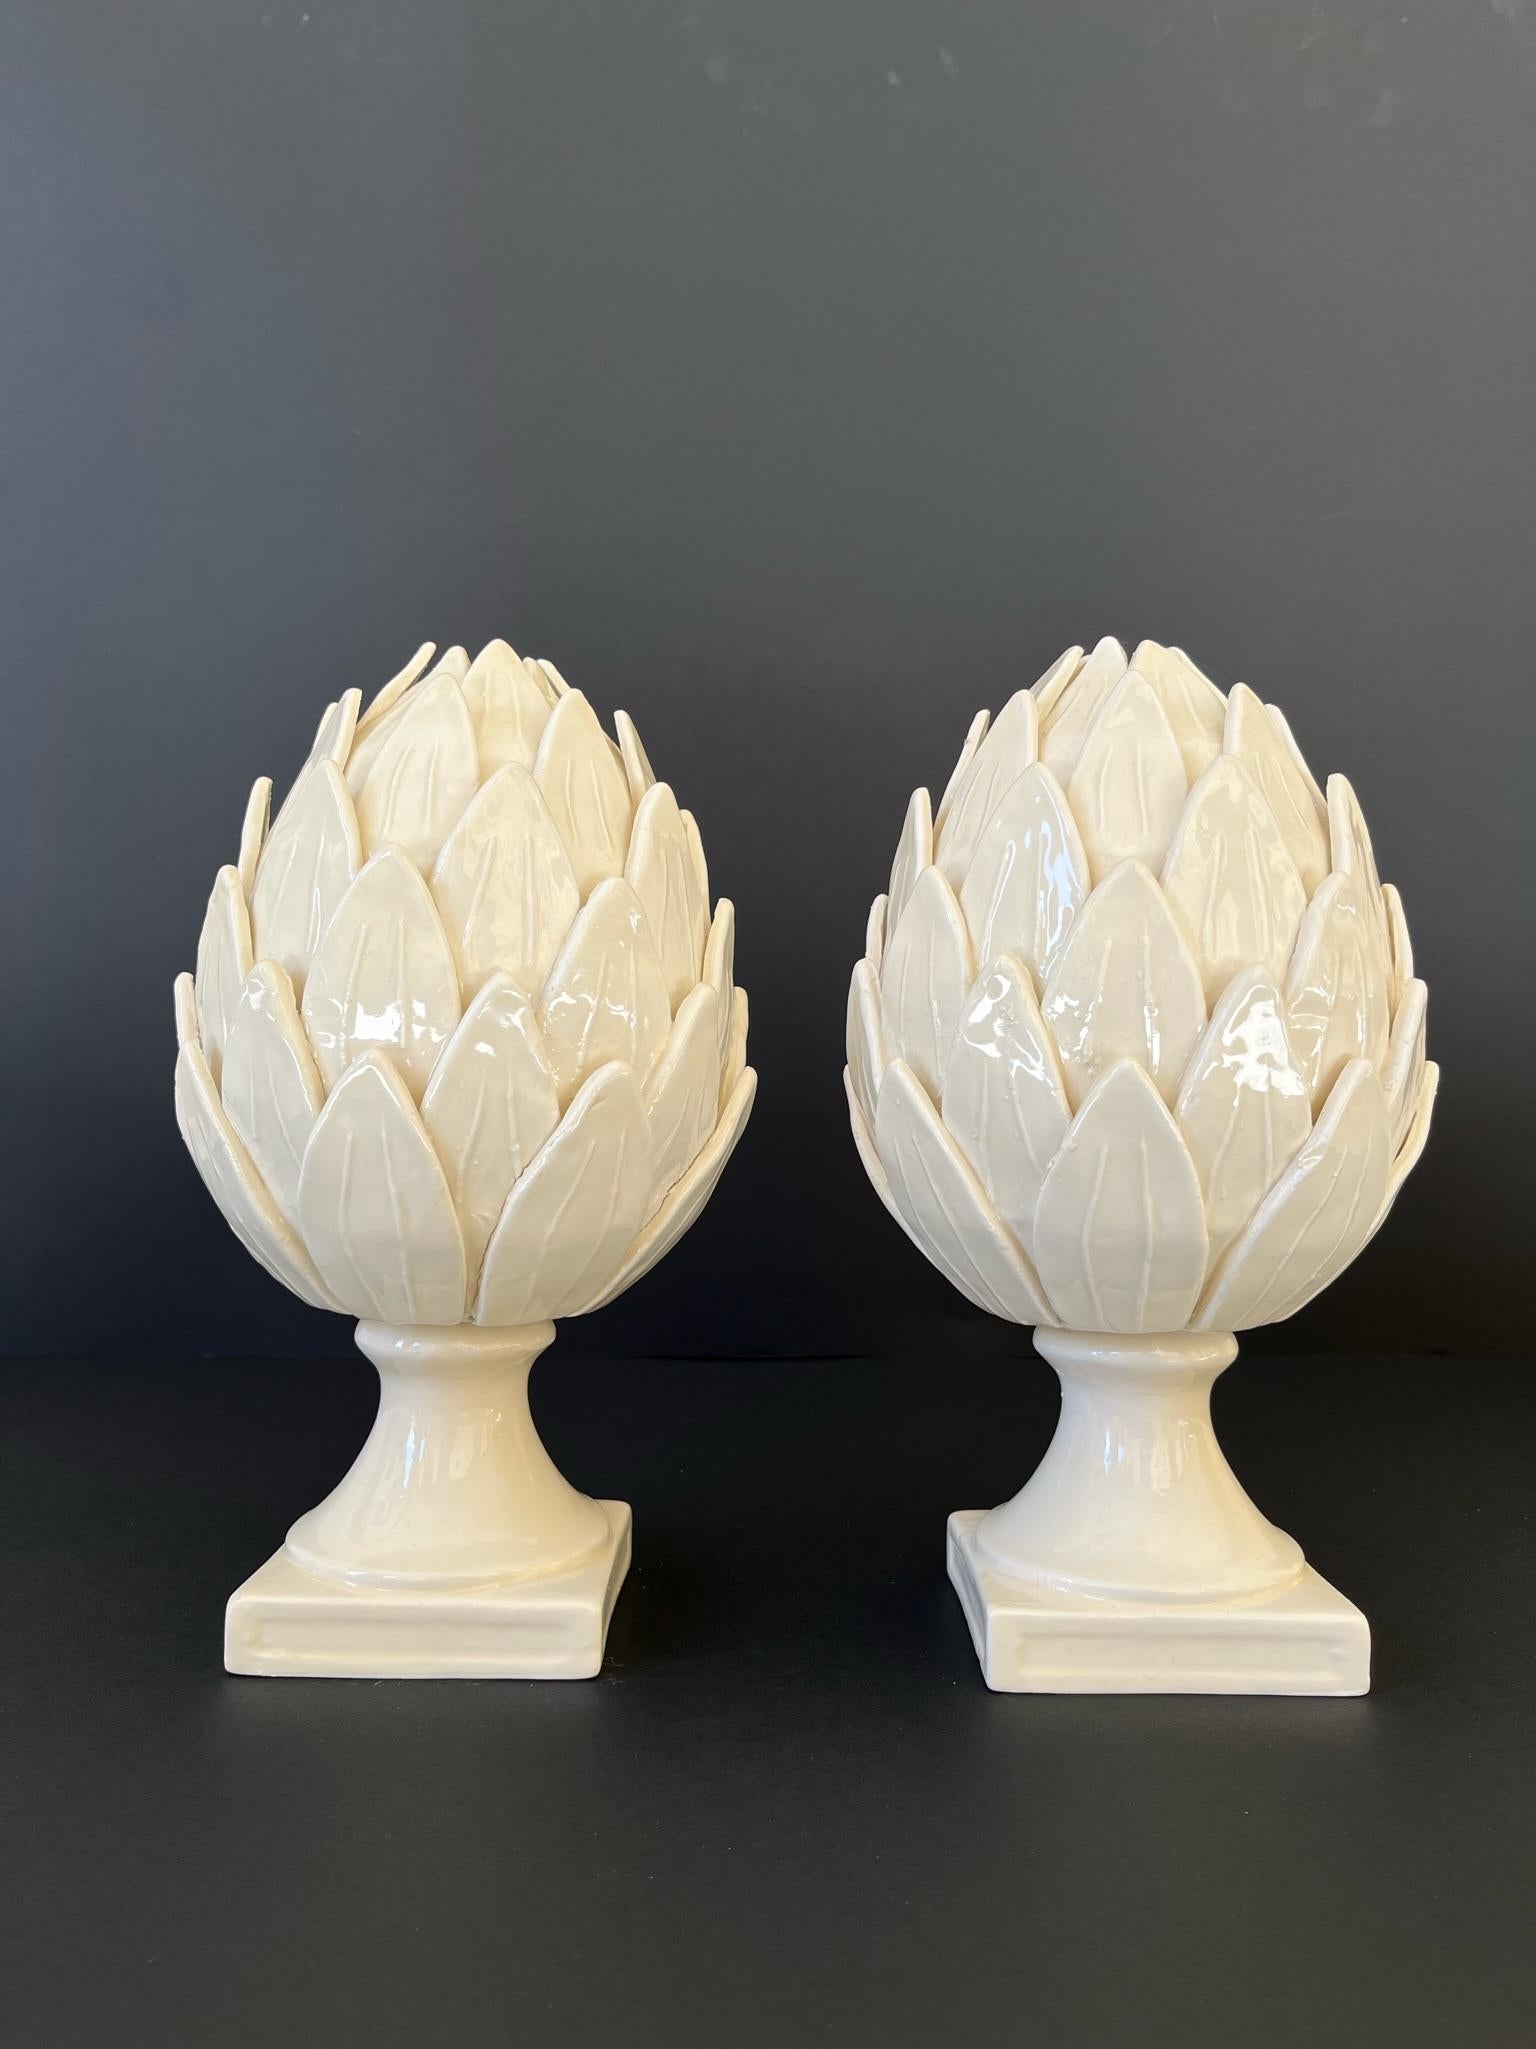 Very rare pair of artichokes in Vecchia Este ceramic, in white color.
These pieces were made in the 21st century in ceramics in a small town near the area of Padua.

These artichokes require a huge amount of work as each piece is applied manually